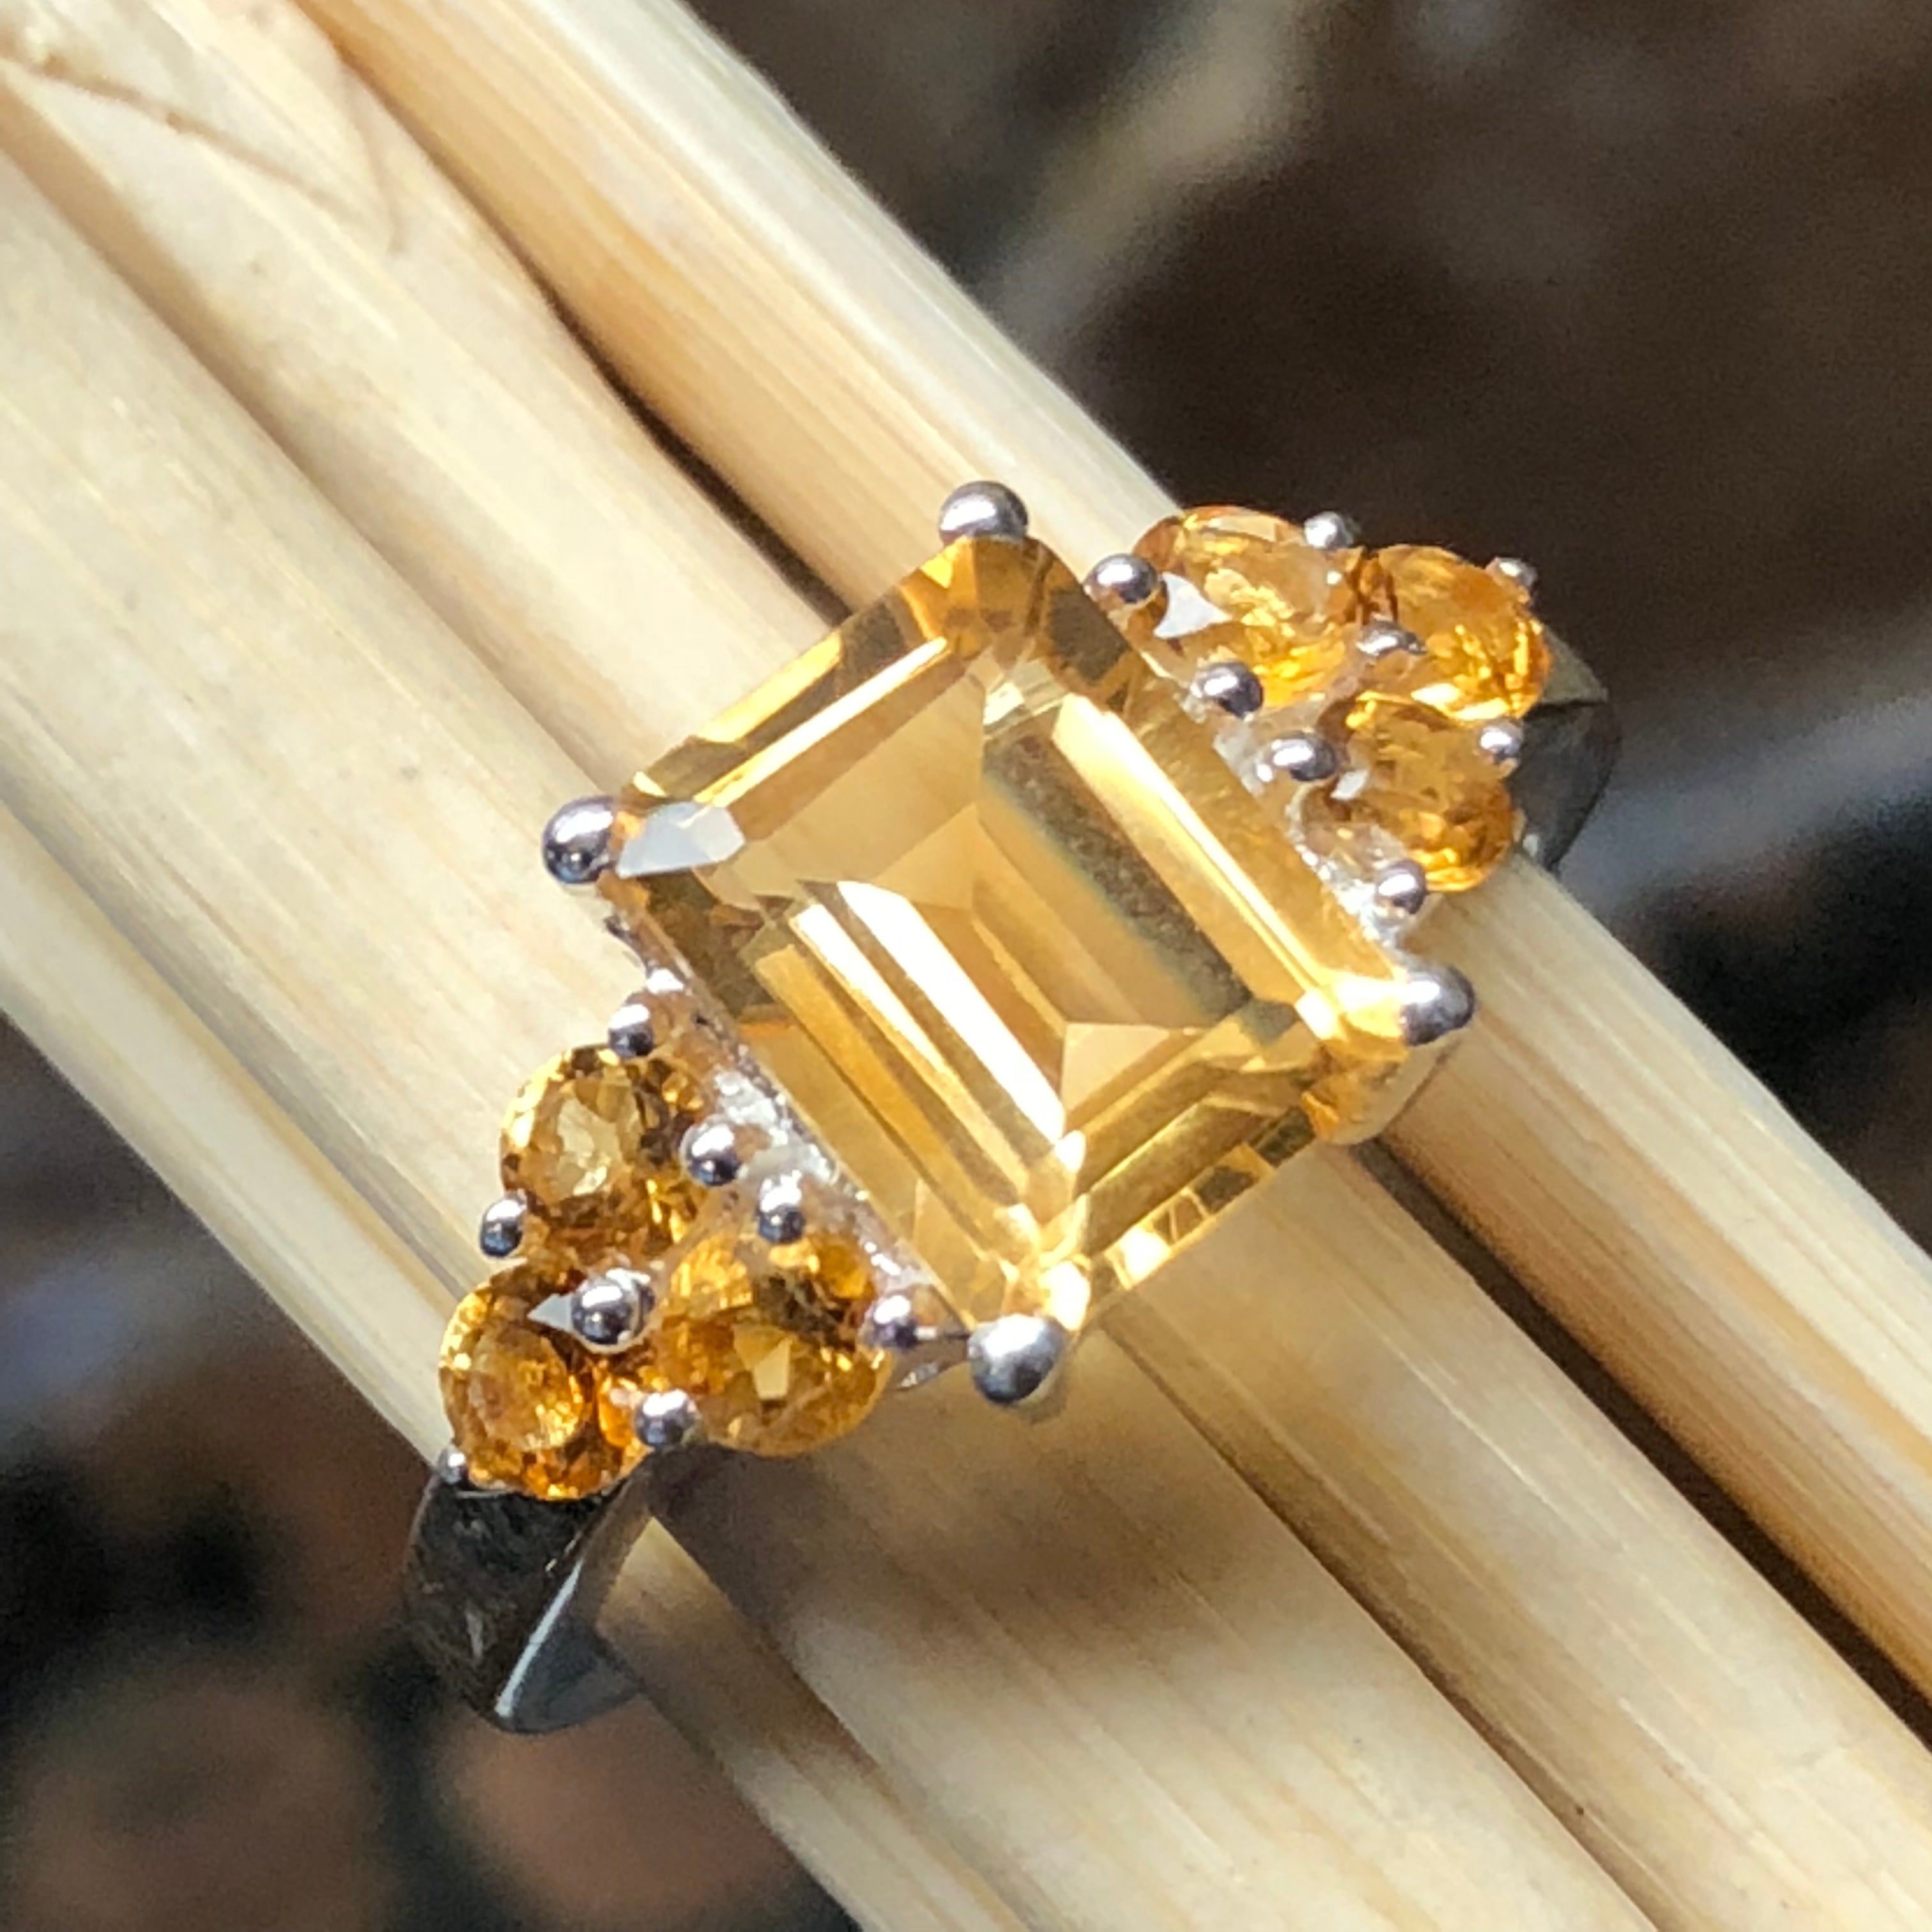 Natural 4ct Golden Citrine 925 Solid Sterling Silver Ring Size 5, 6, 7, 8, 9 - Natural Rocks by Kala